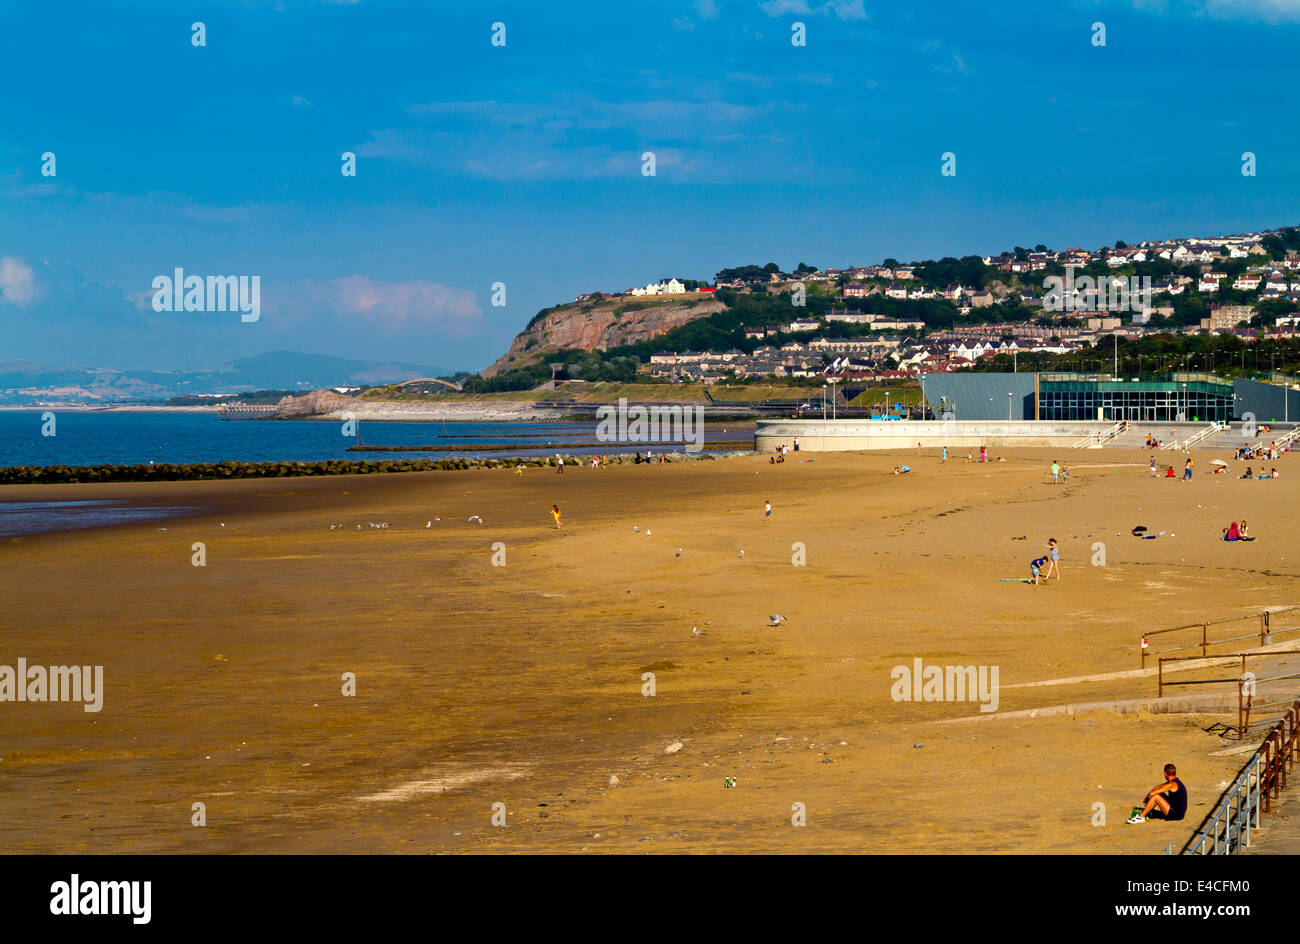 The beach and coastline at Colwyn Bay a traditional seaside resort in Conwy on the North Wales coast UK Stock Photo